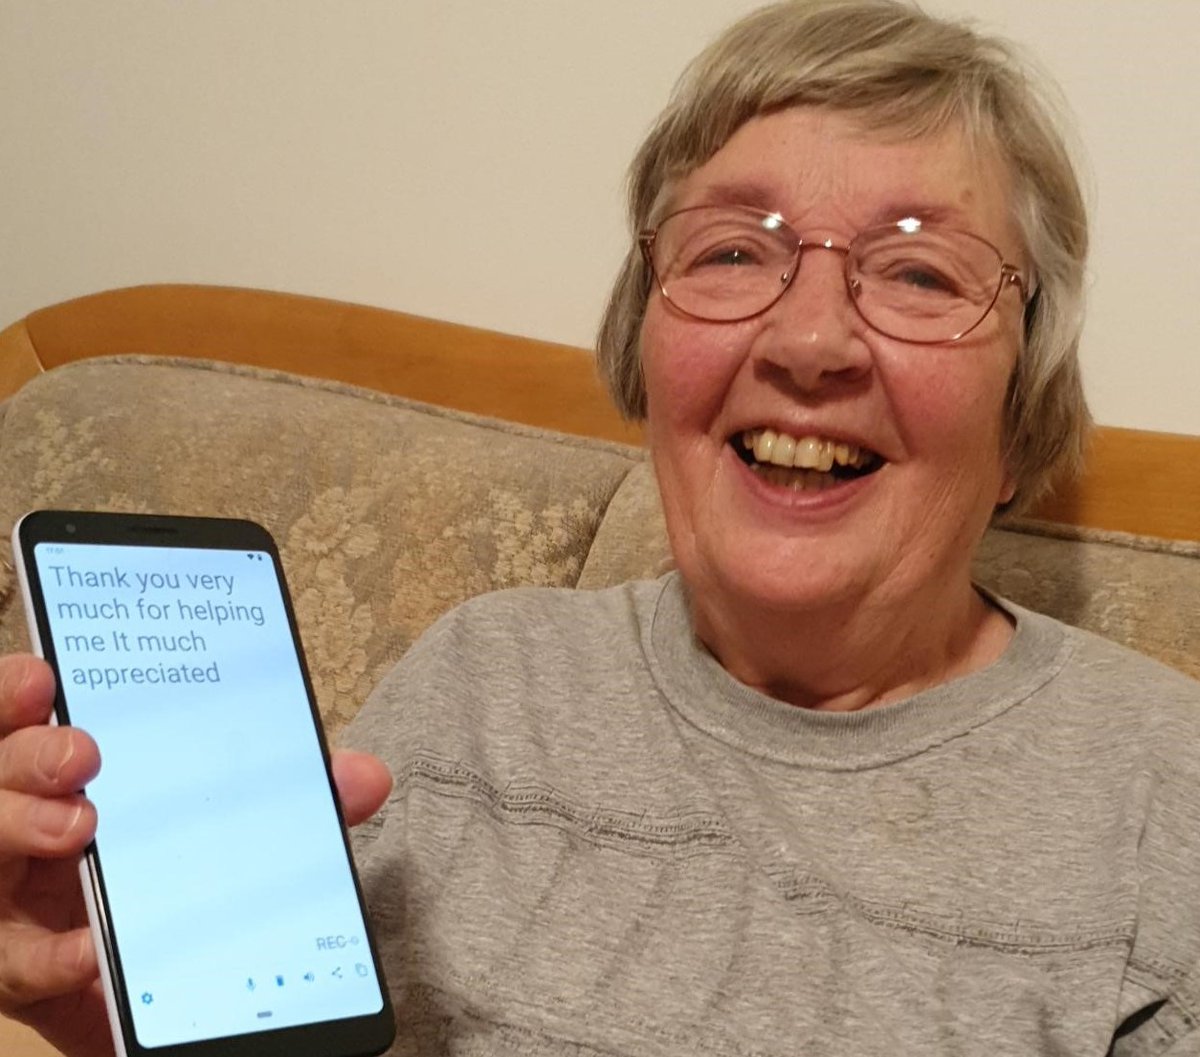 Six free apps AHPs should know to help clients with MND: Tues 14th Sep 1-2:30pm UK. Free, online and interactive. Live demo & content added for a client. Try yourself through the session if you have an Android phone/tablet: email richard.cave@nhs.net to register Pls Share :)